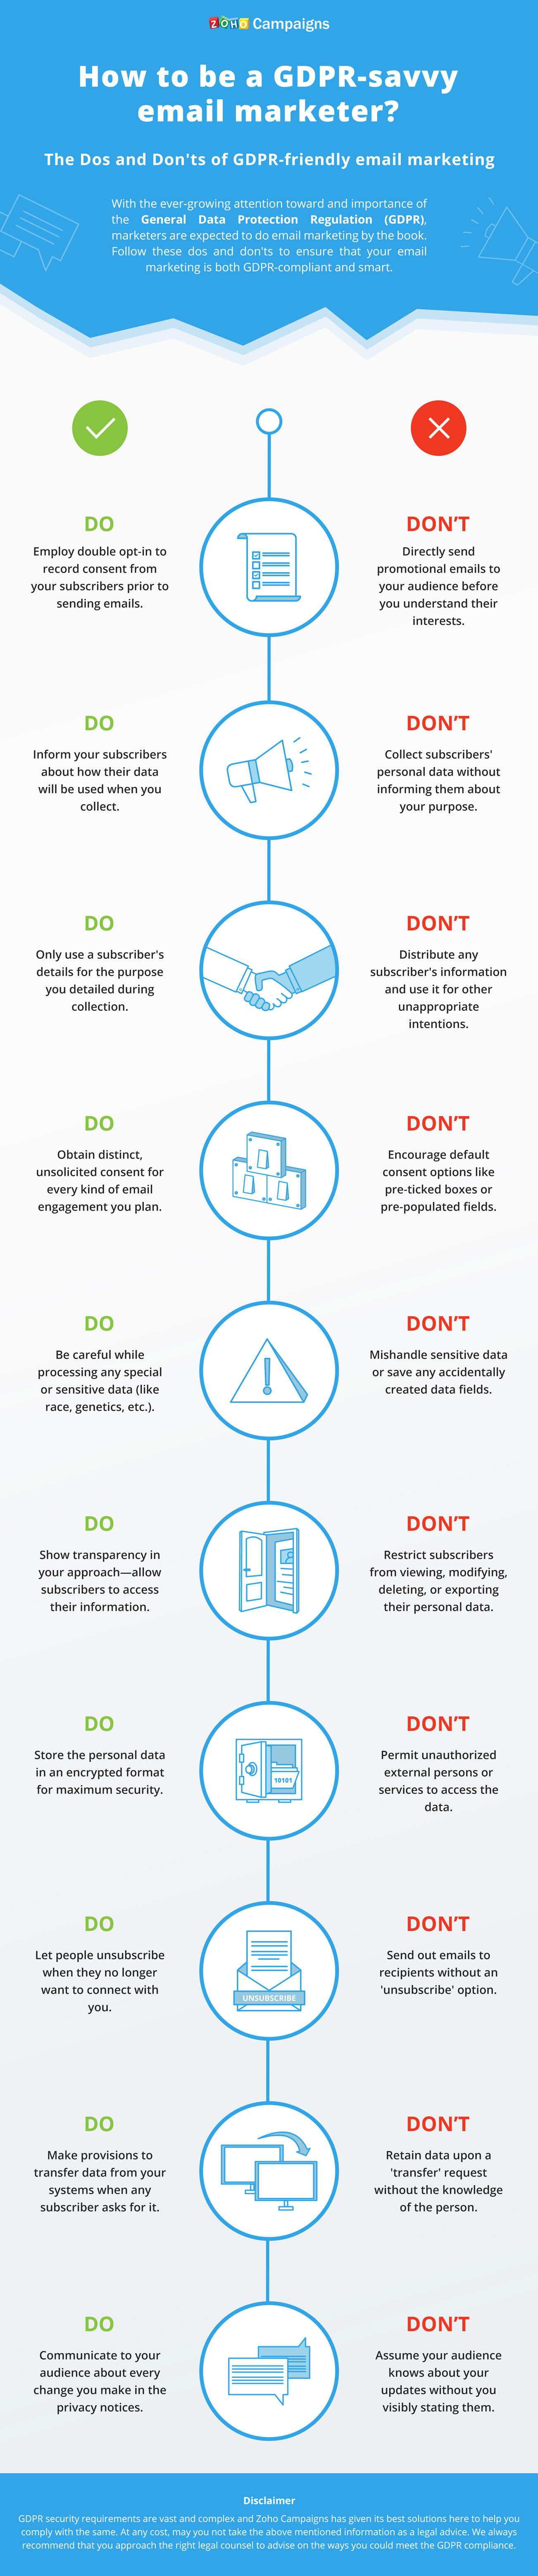 gdpr-dos-don'ts-infographic